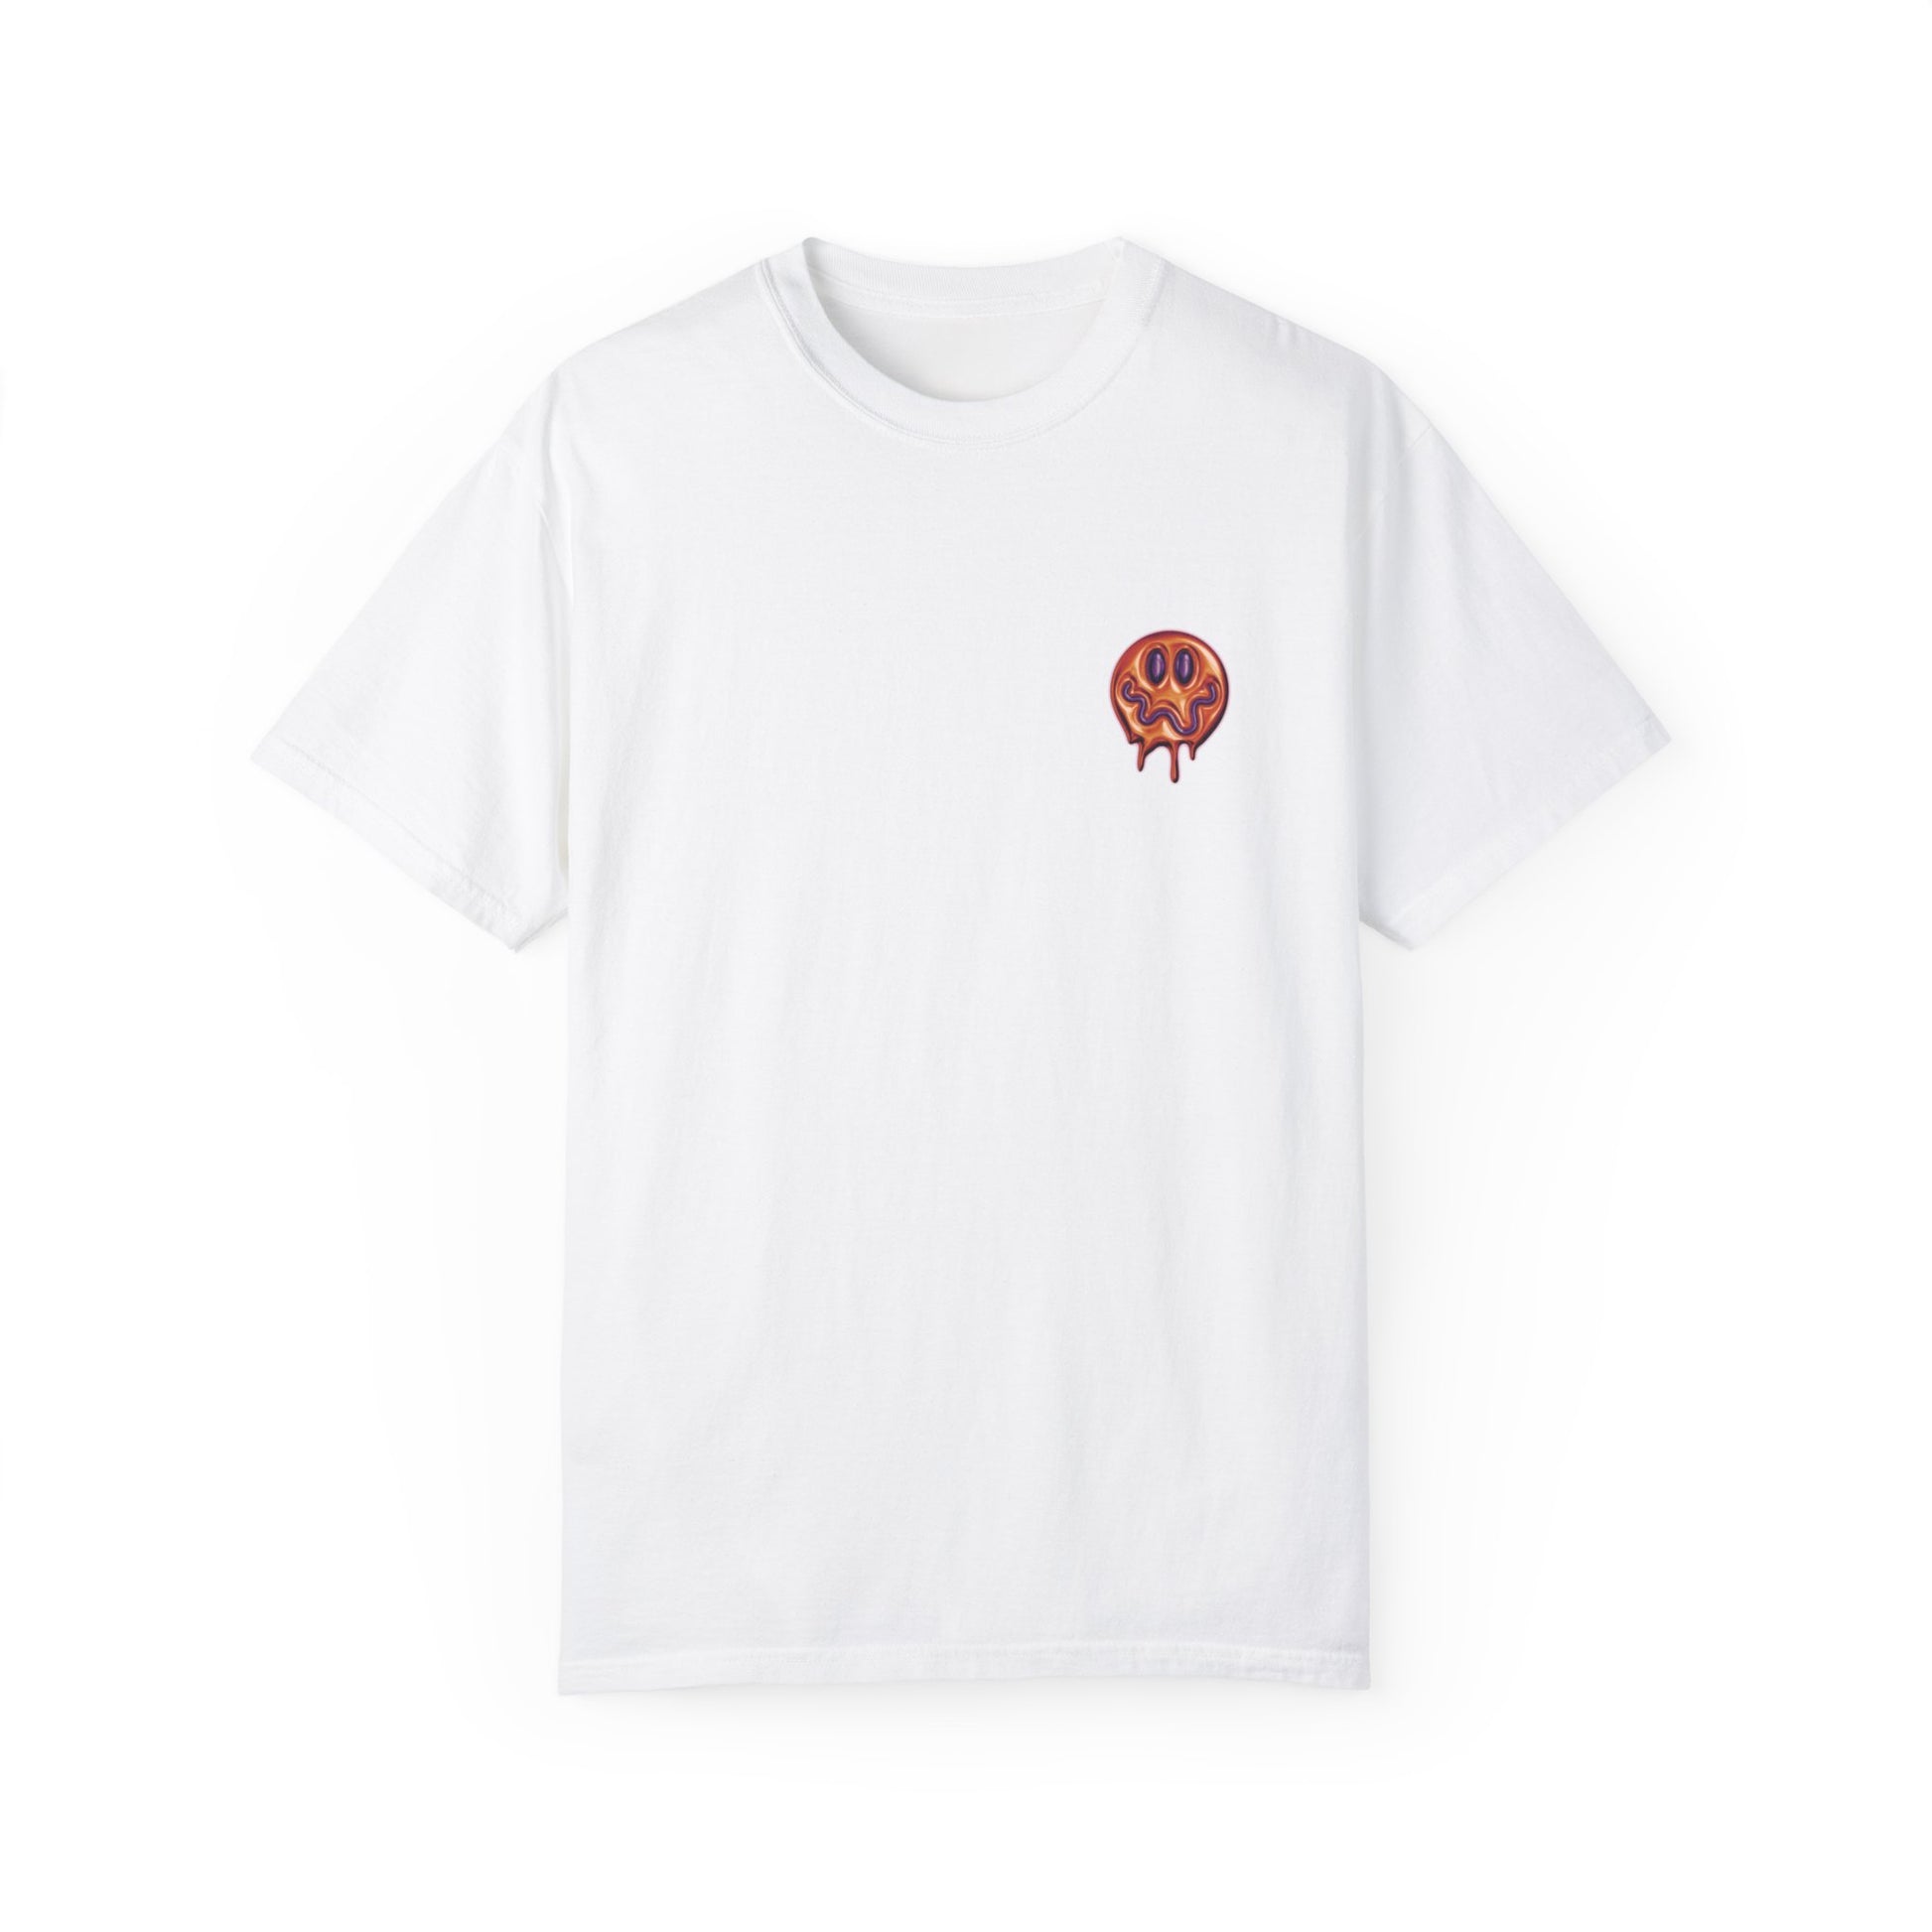 Casual White T-Shirt w/ Text and Smile Face Graphic